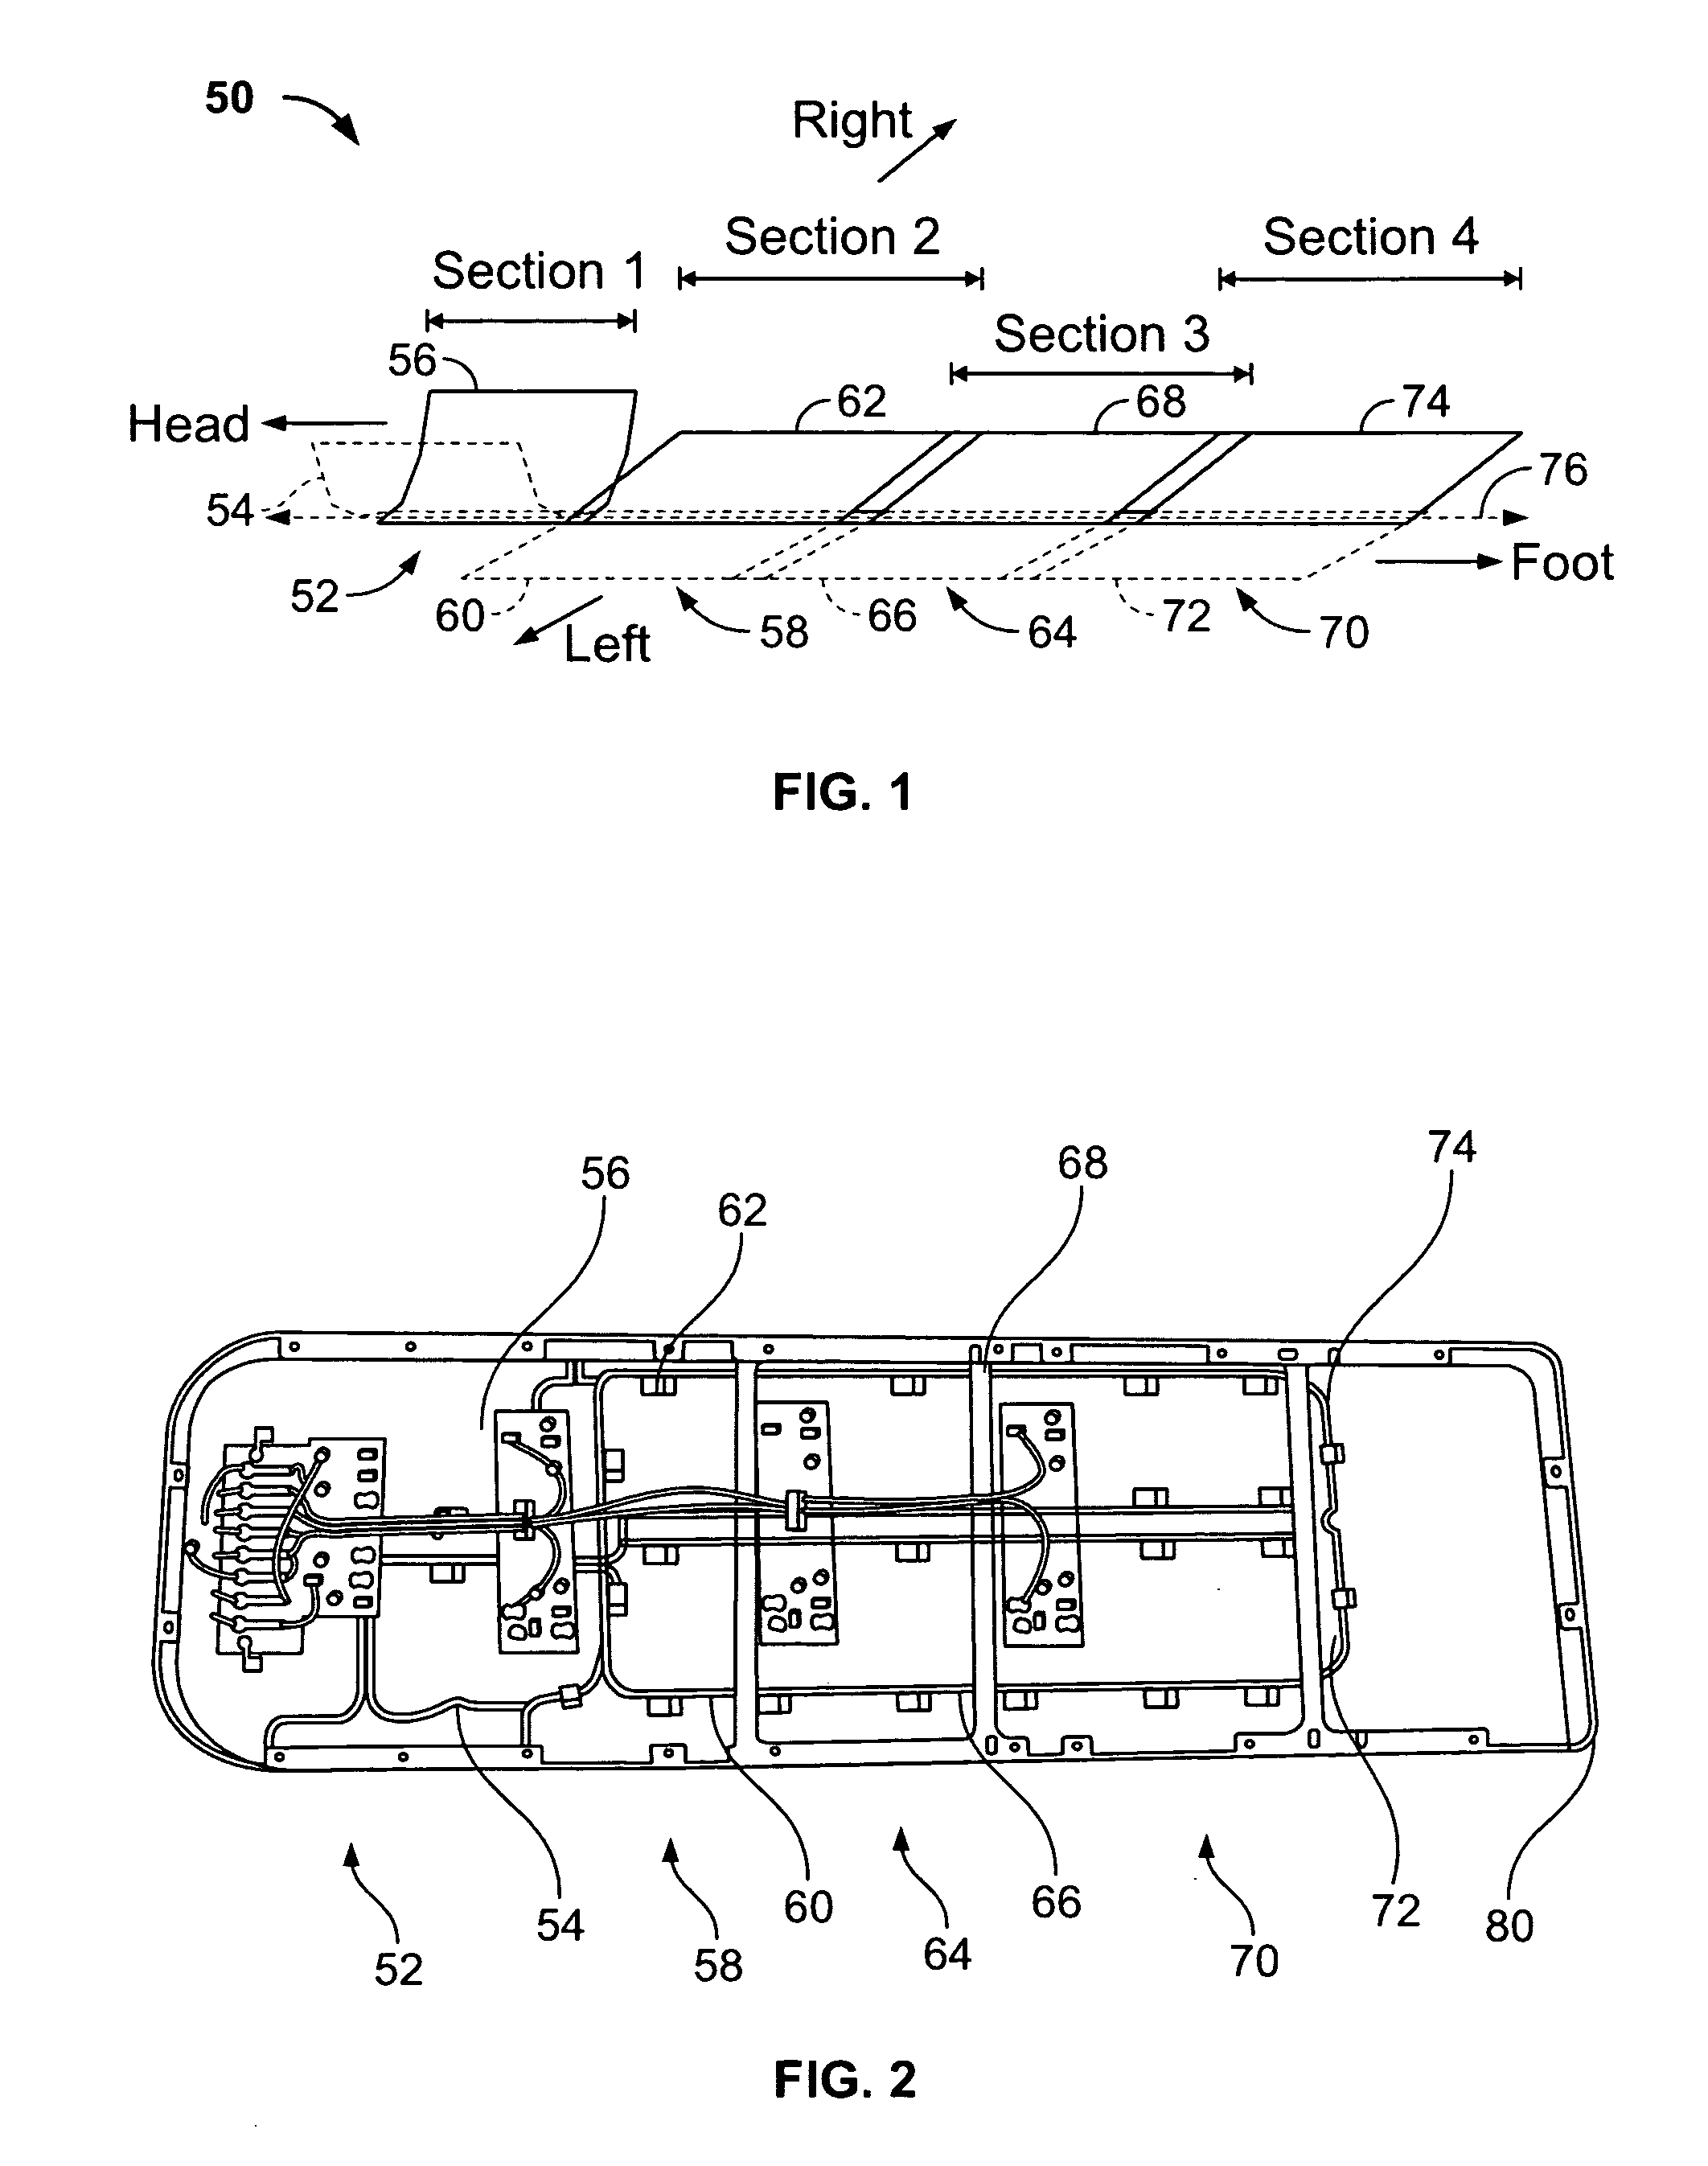 Cervical-thoracic-lumbar spine phased array coil for horizontal field MRI systems